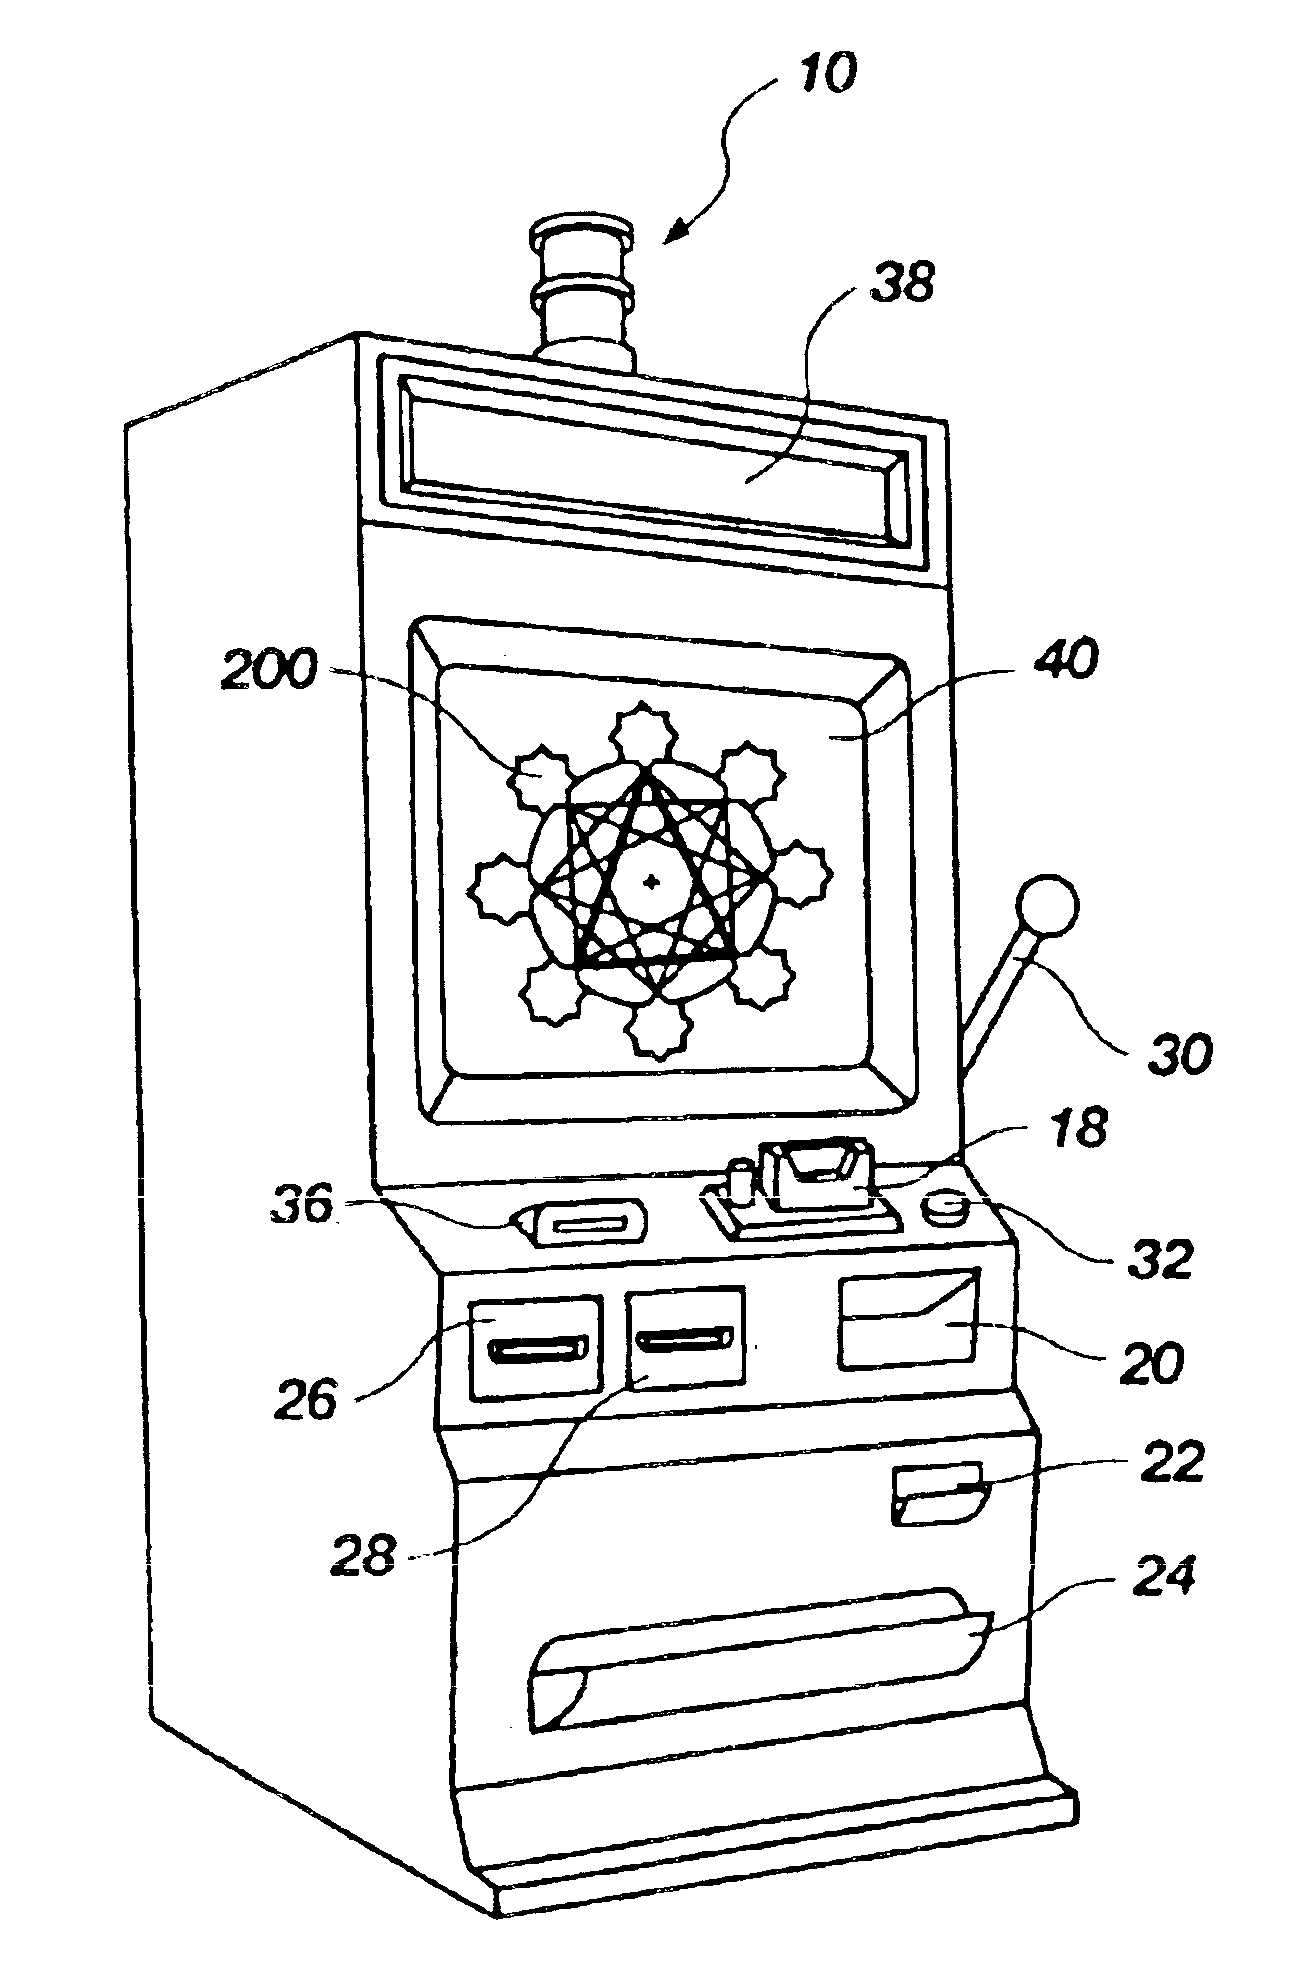 Method and apparatus for gaming using symbols movable in the plane of a display